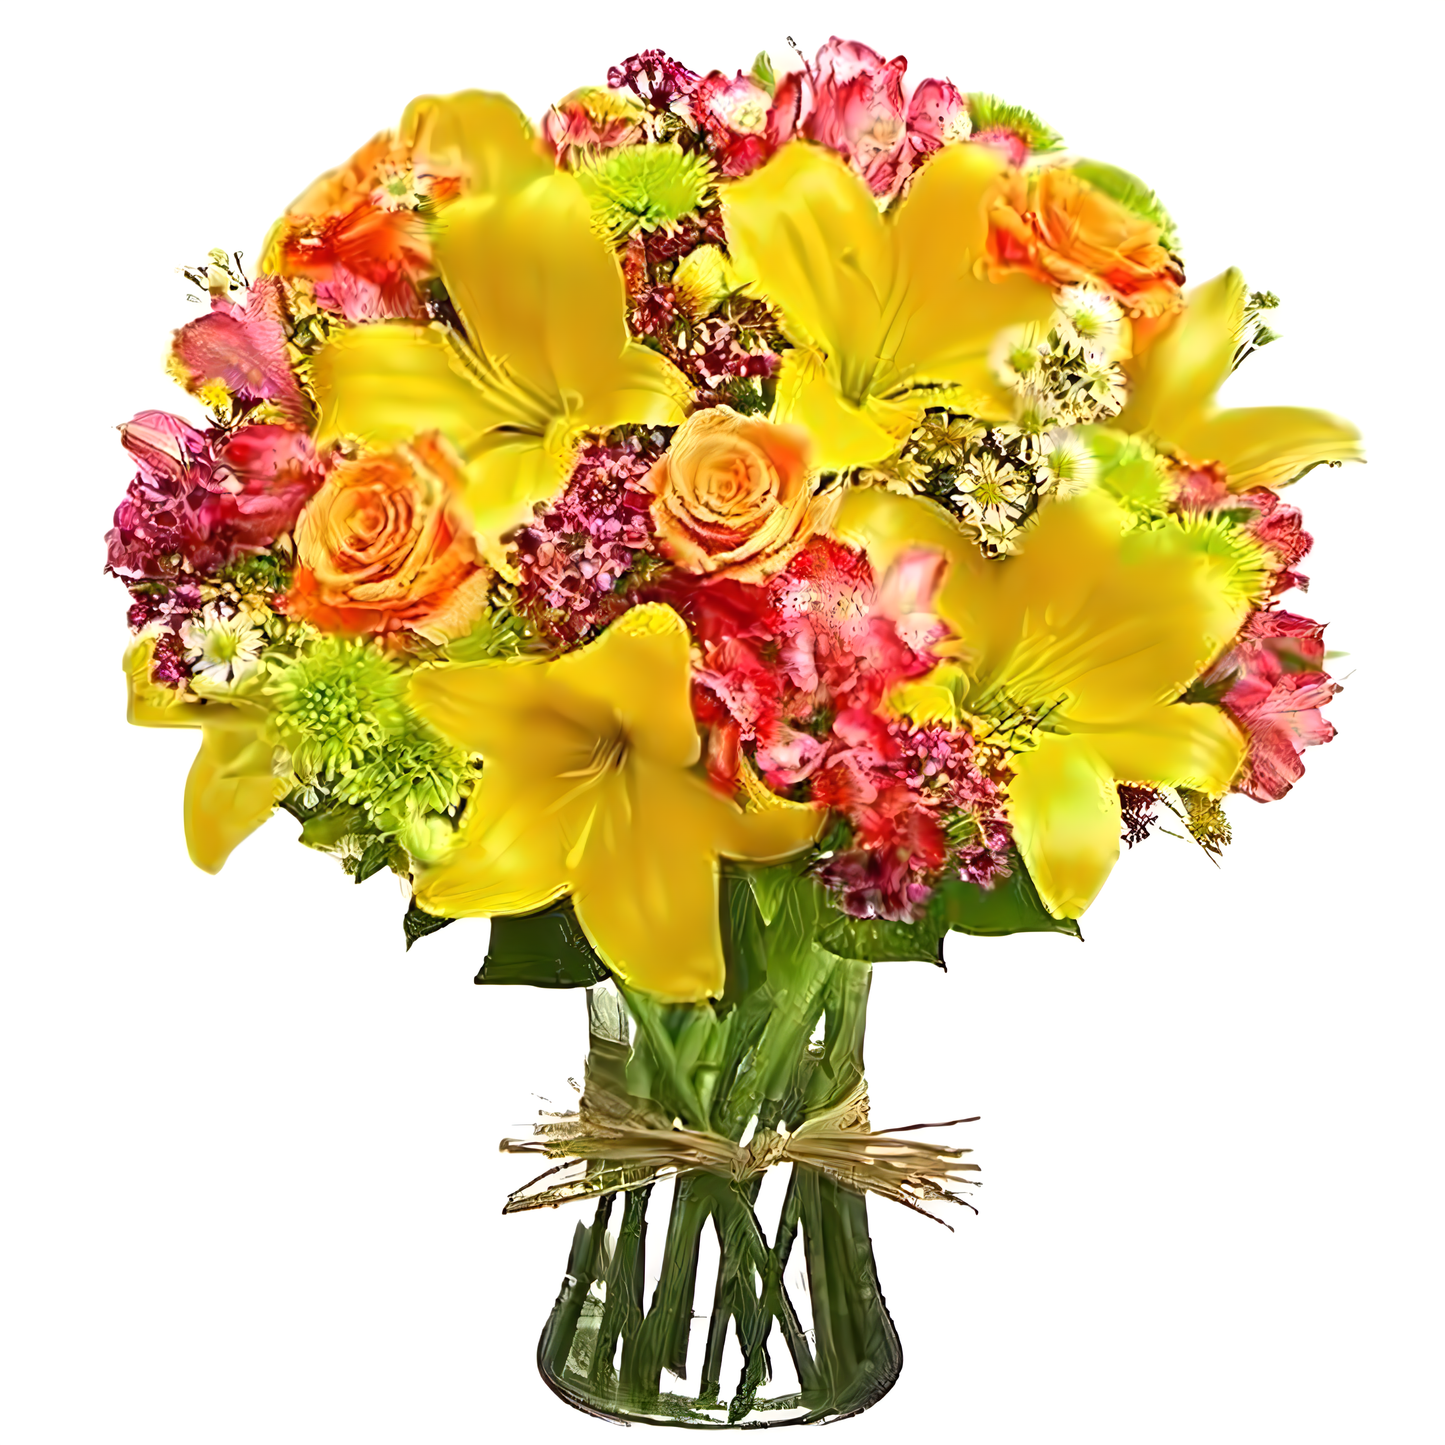 NYC Flower Delivery - Arrangement for Sympathy - Funeral > For the Service